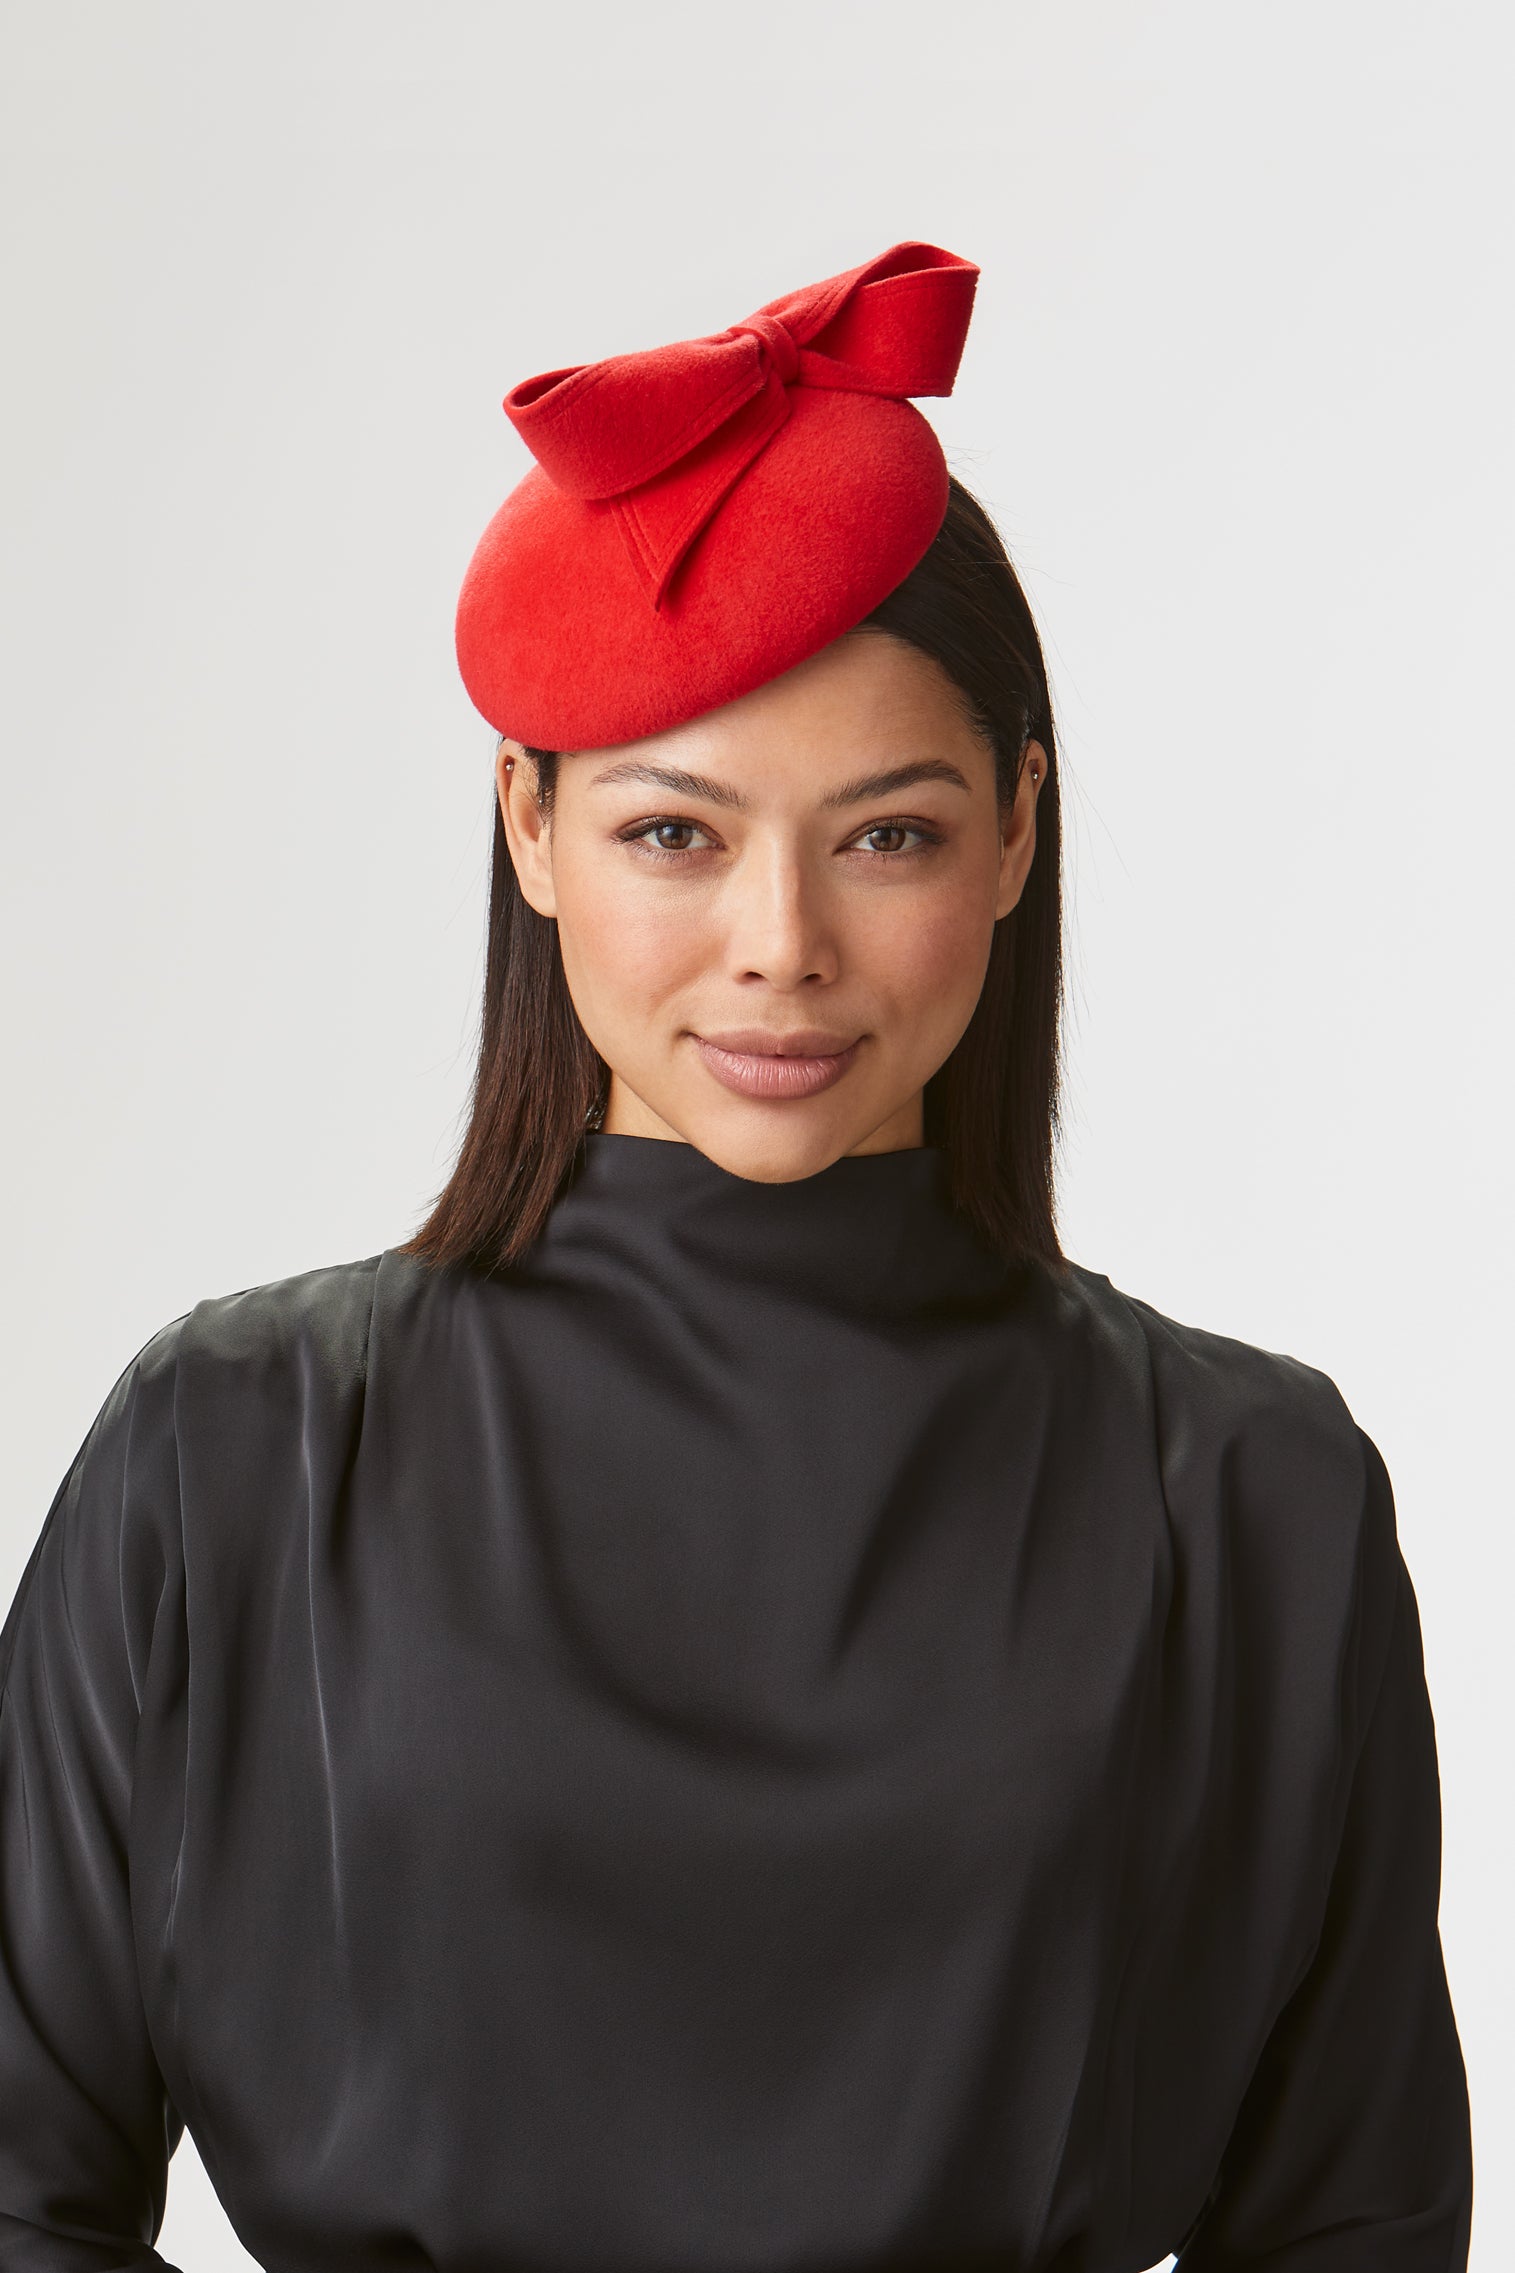 Lana Red Button Hat - Royal Ascot Hats - Lock & Co. Hatters London UK